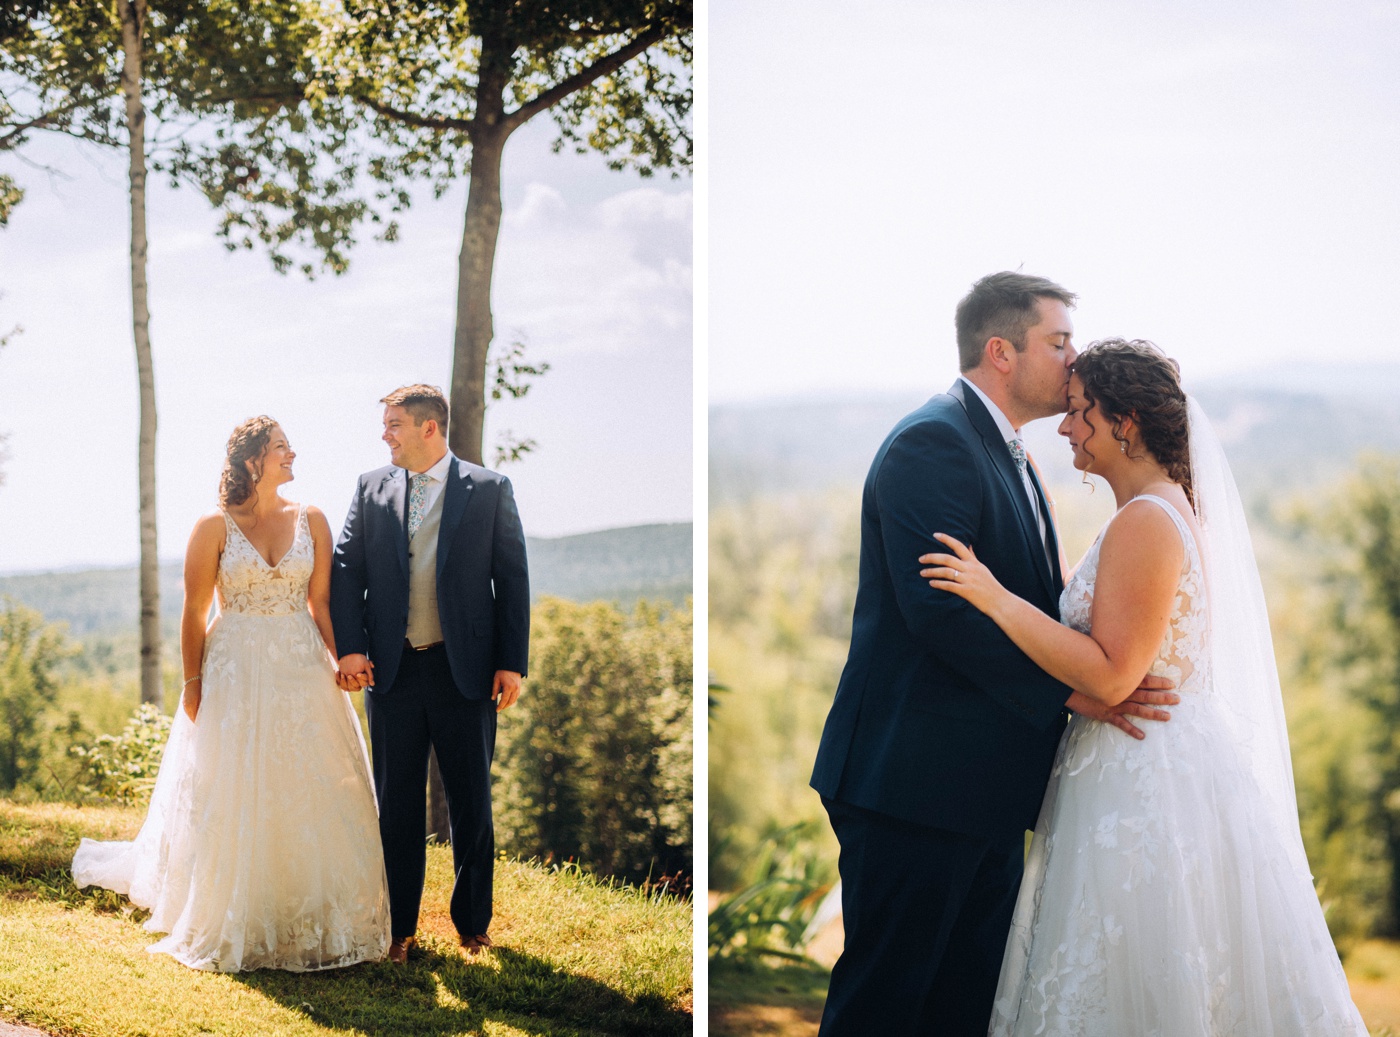 Bridal portraits on the property of a private home in Deering, NH